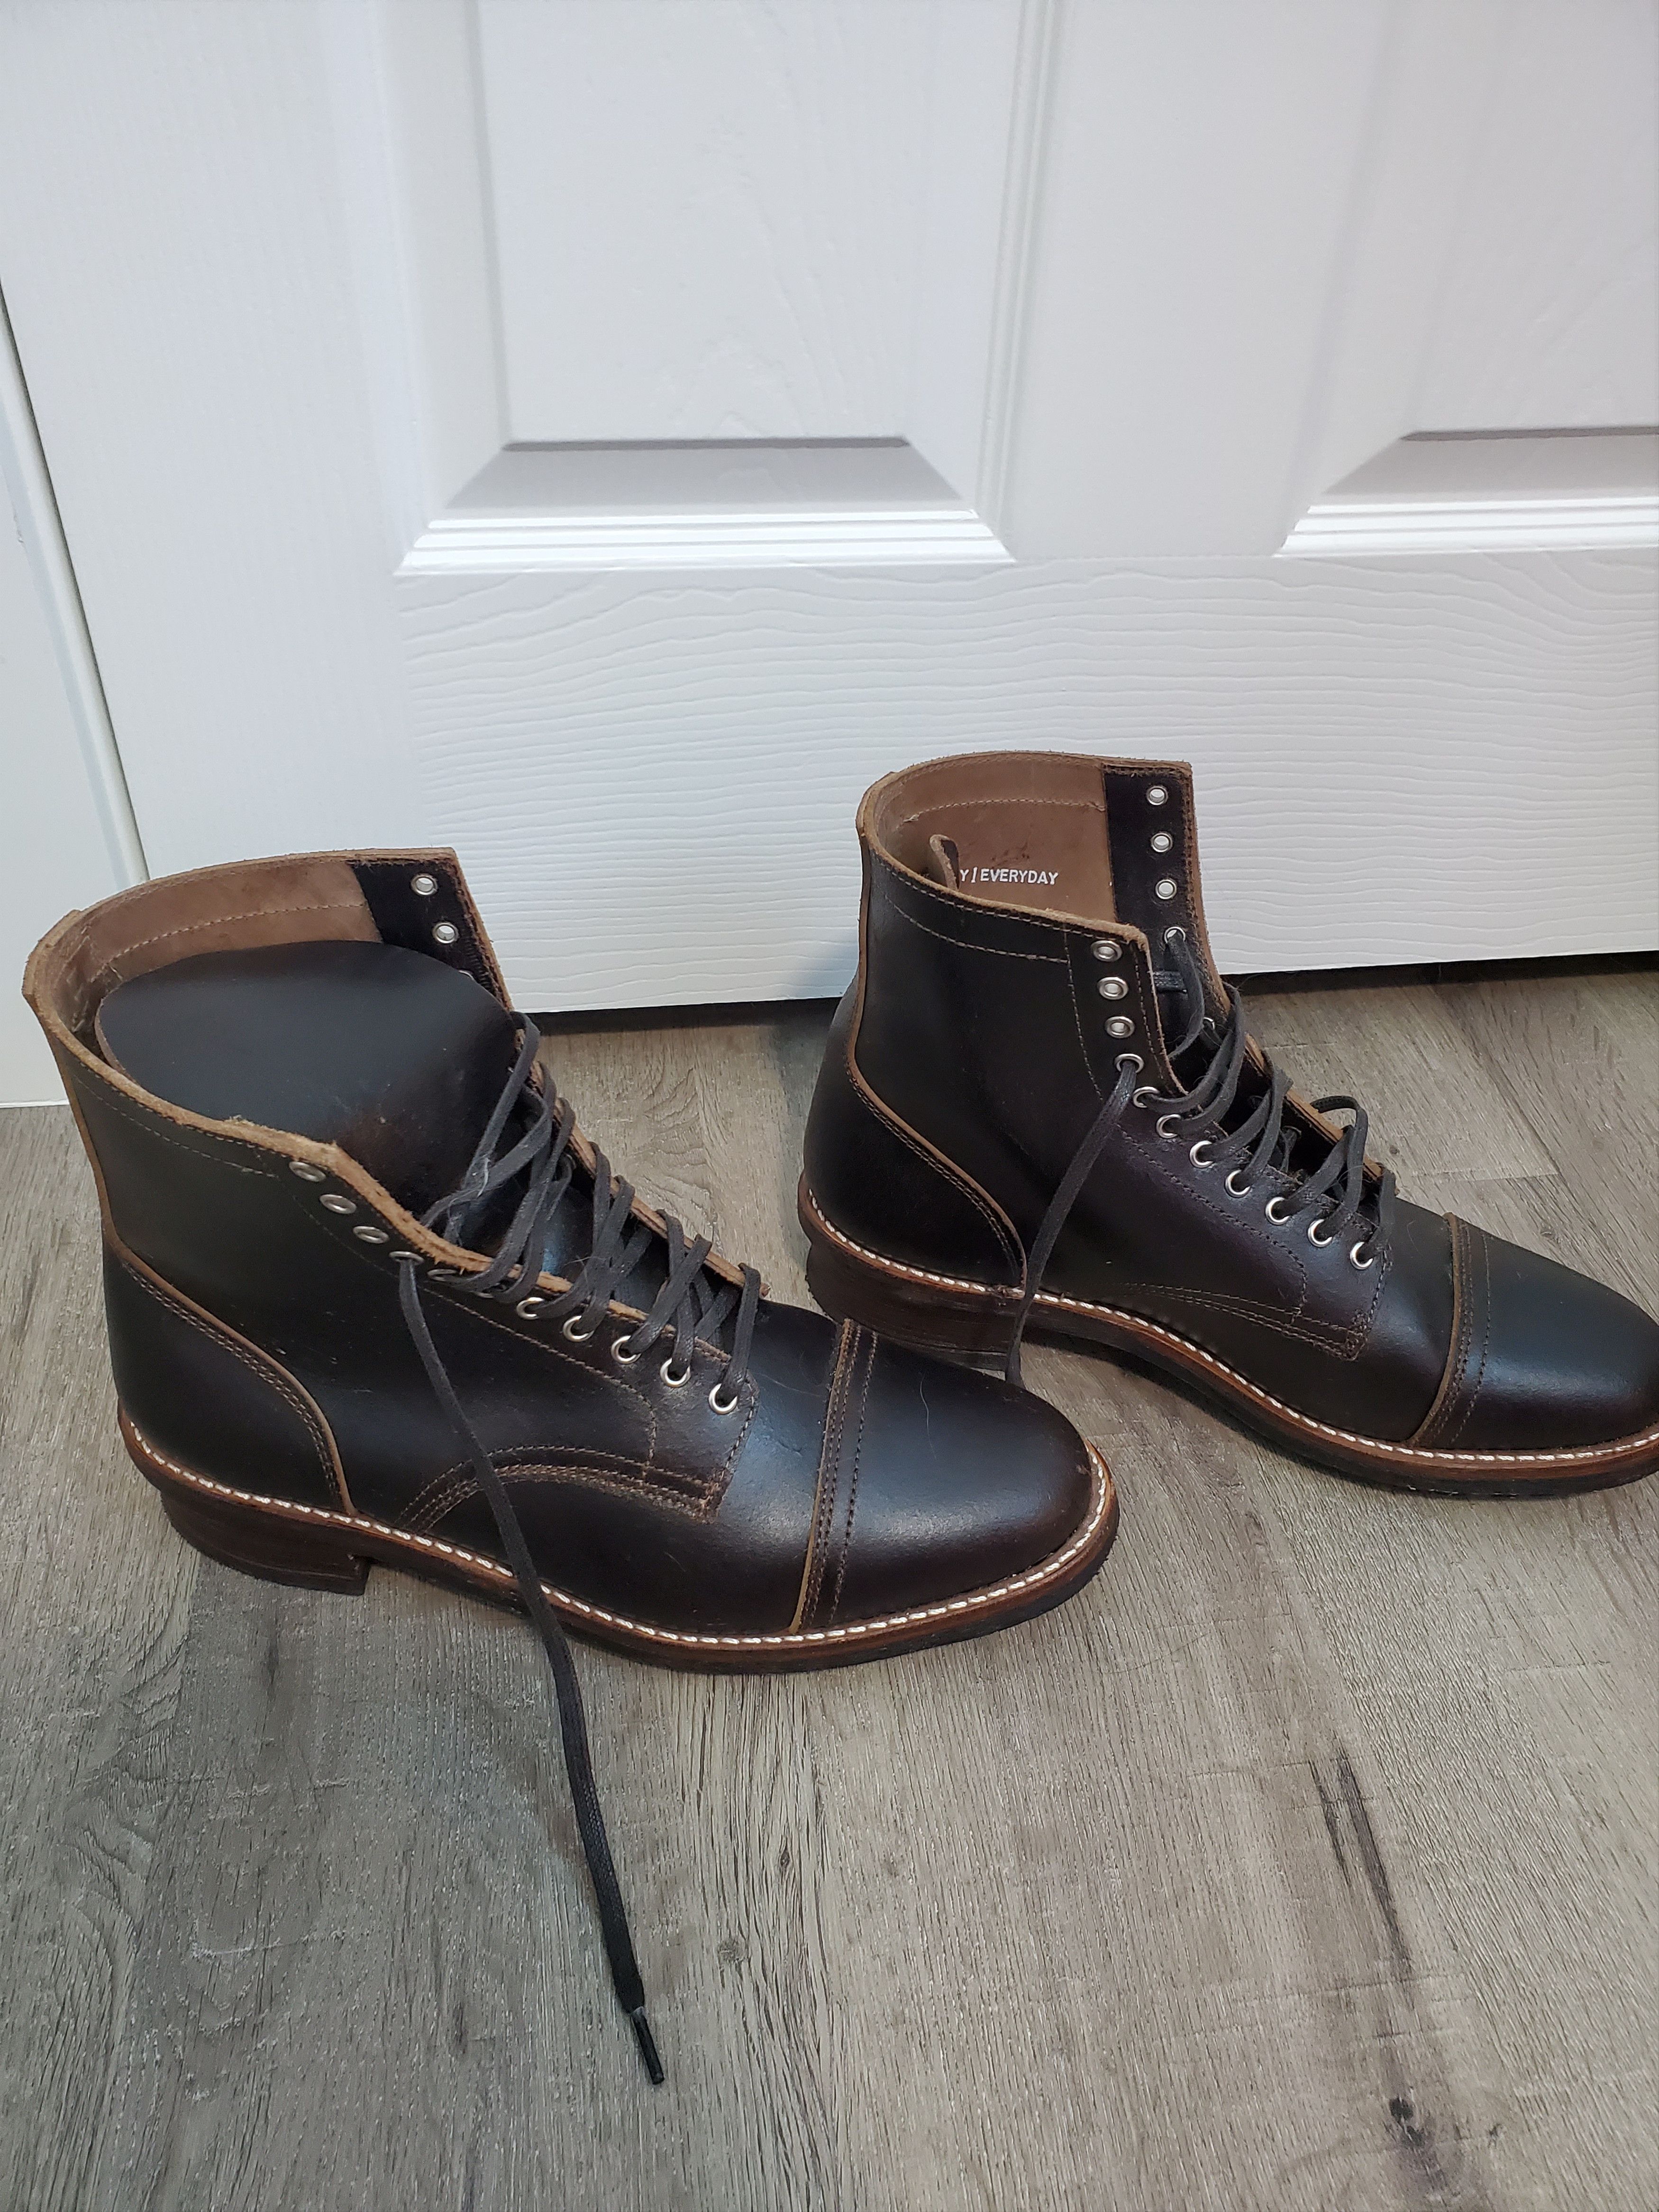 Thursday Boots Thursday Boot Loggers Waxed Cacao Size US 10 / EU 43 - 2 Preview